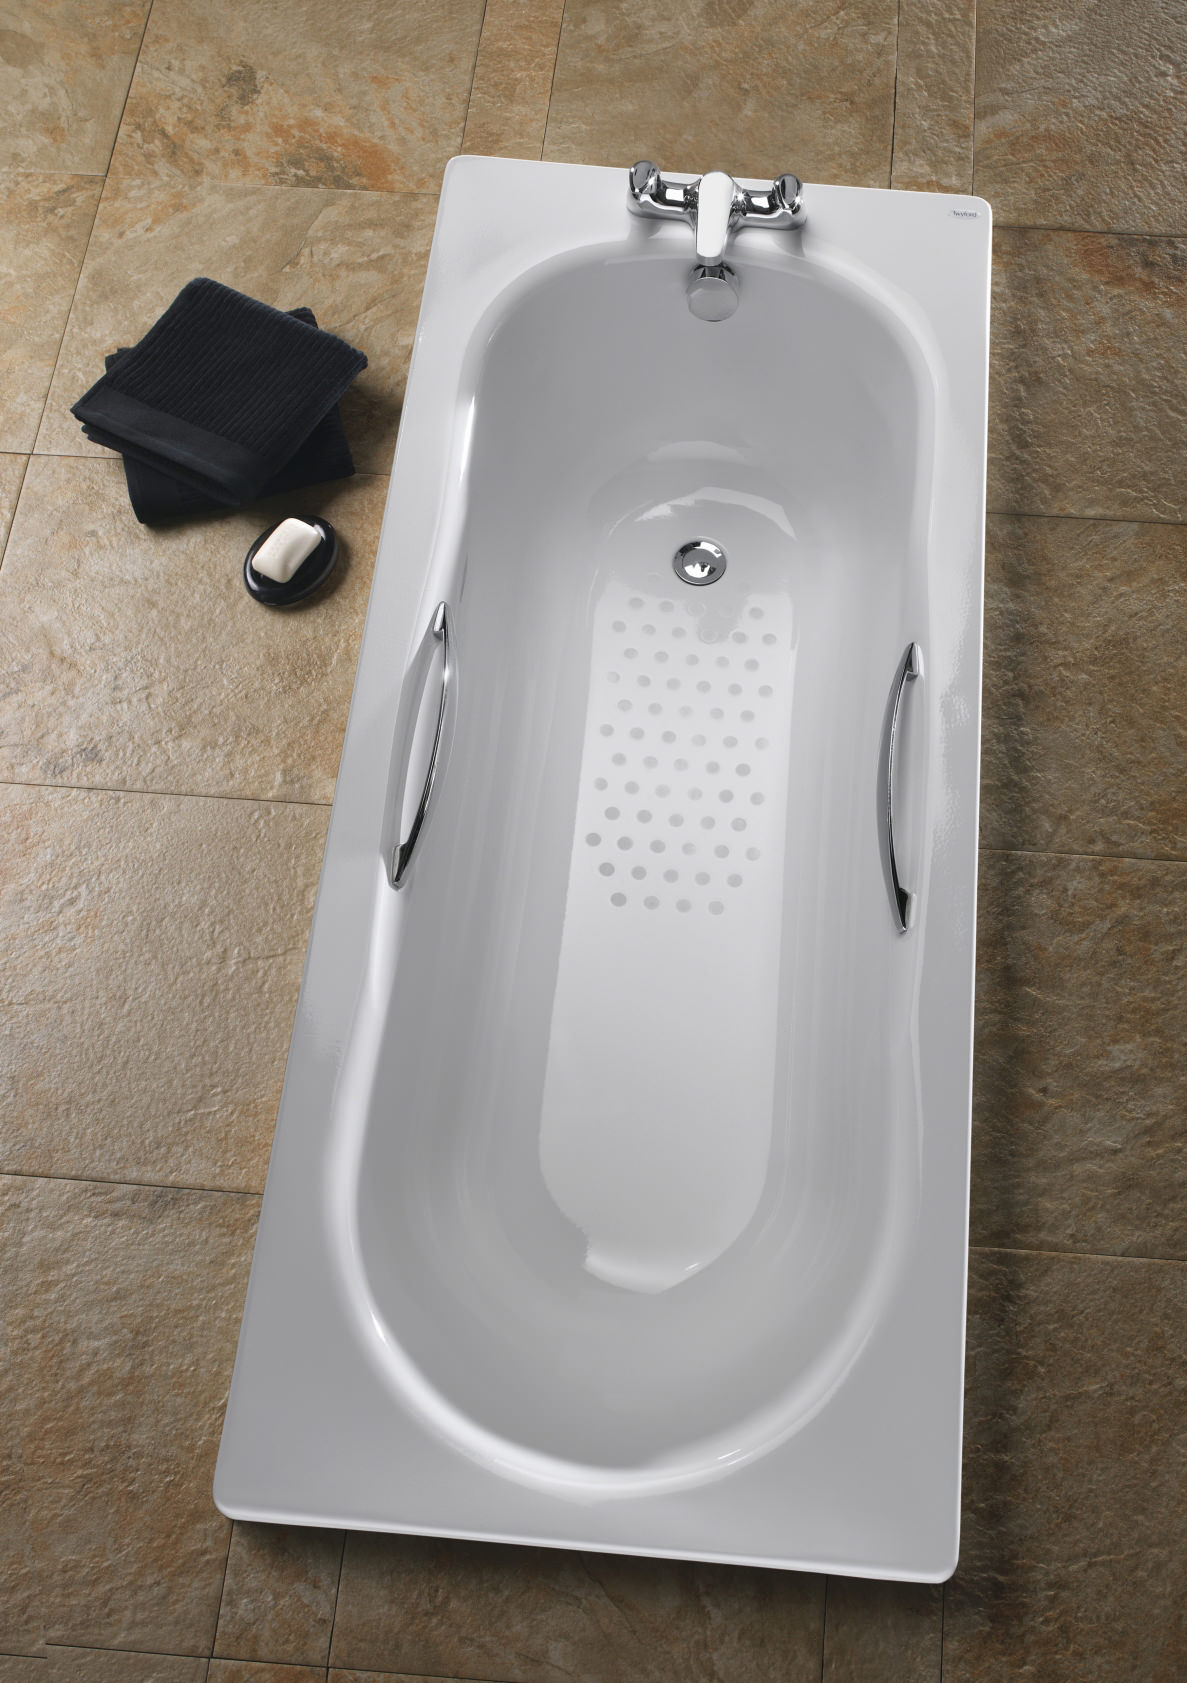 Twyford Celtic Single Ended White Plain Steel Bath With Legs And